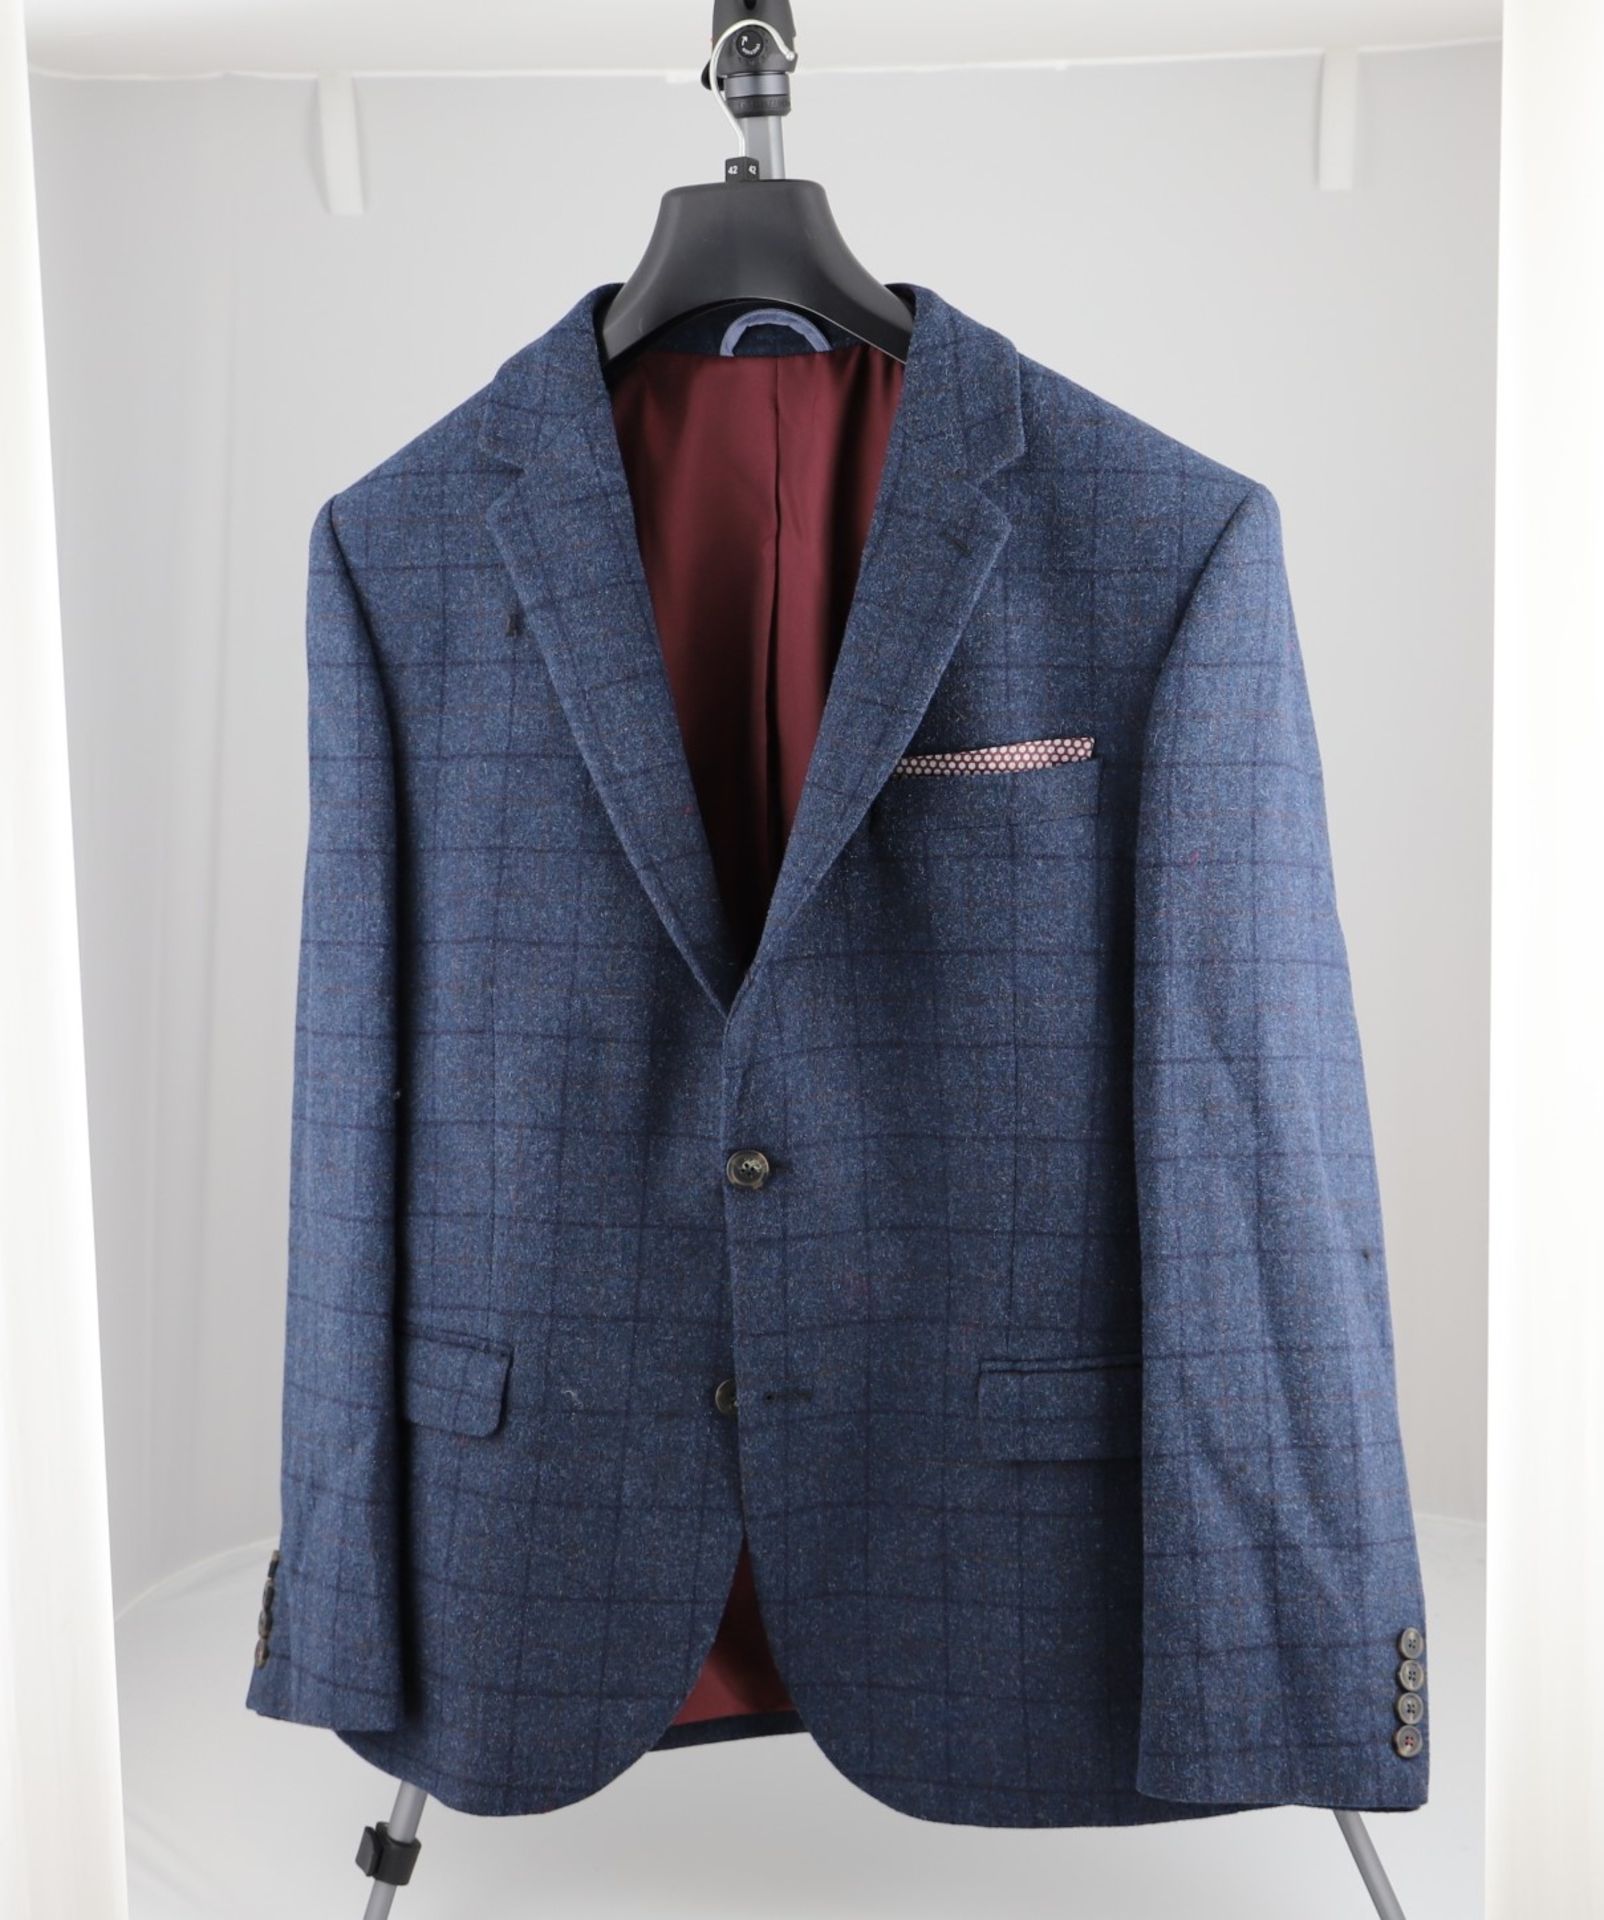 1 x mixed pallet = 113 items of Grade A Marks and Spencer Menswear Clothing. Approx Total RRP £7,617